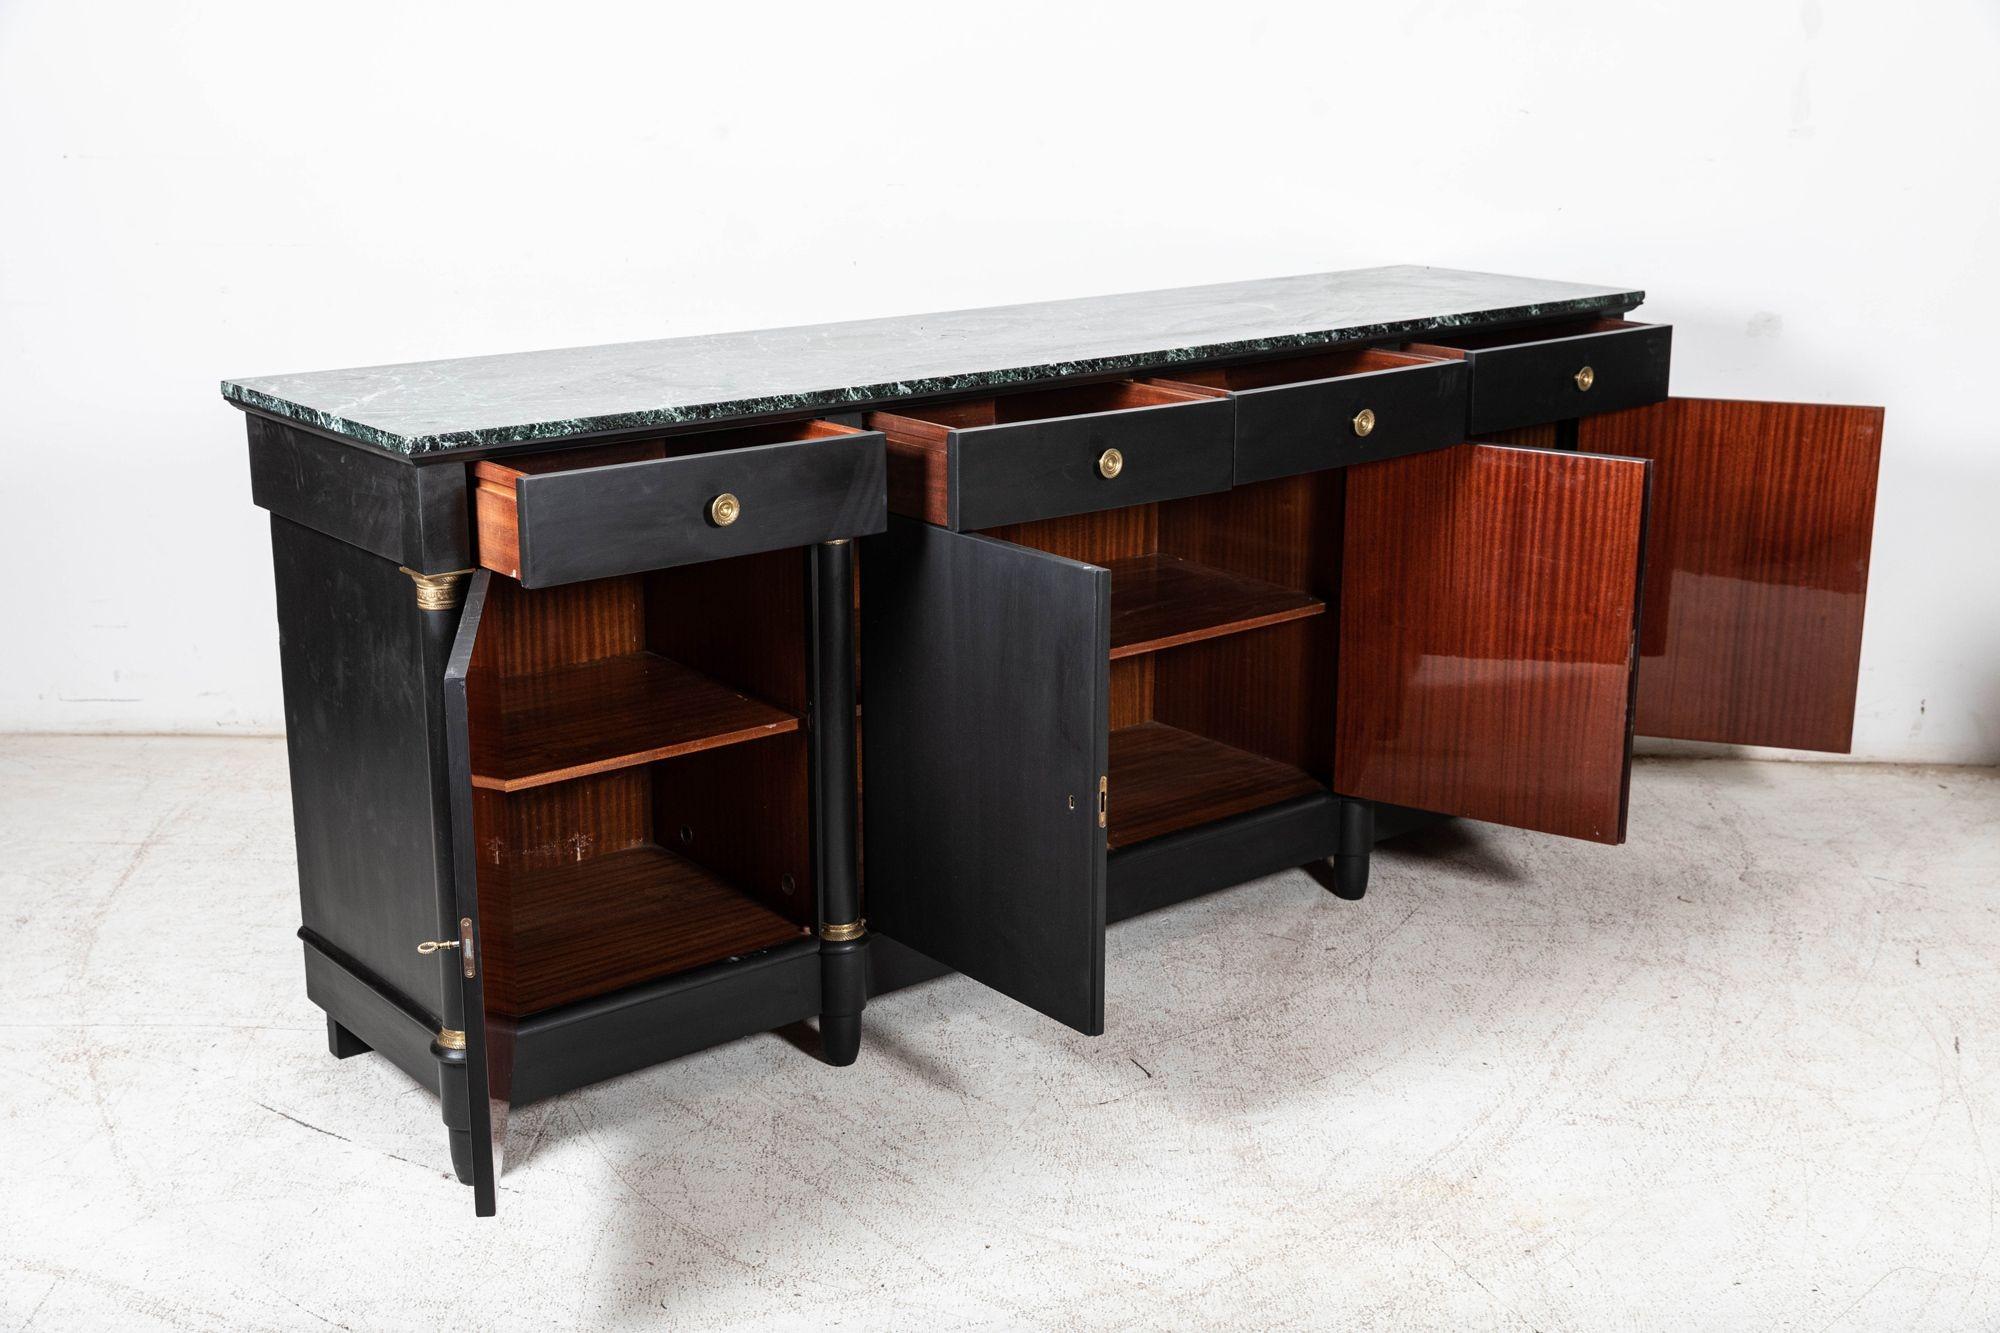 Circa 1950
Monumental Ebonised French Empire Revival Marble Sideboard, Rosewood Veneer with Brass columns
Excellent Quality & Colour
With keys
sku 1064
W242 x D60 x H101 cm